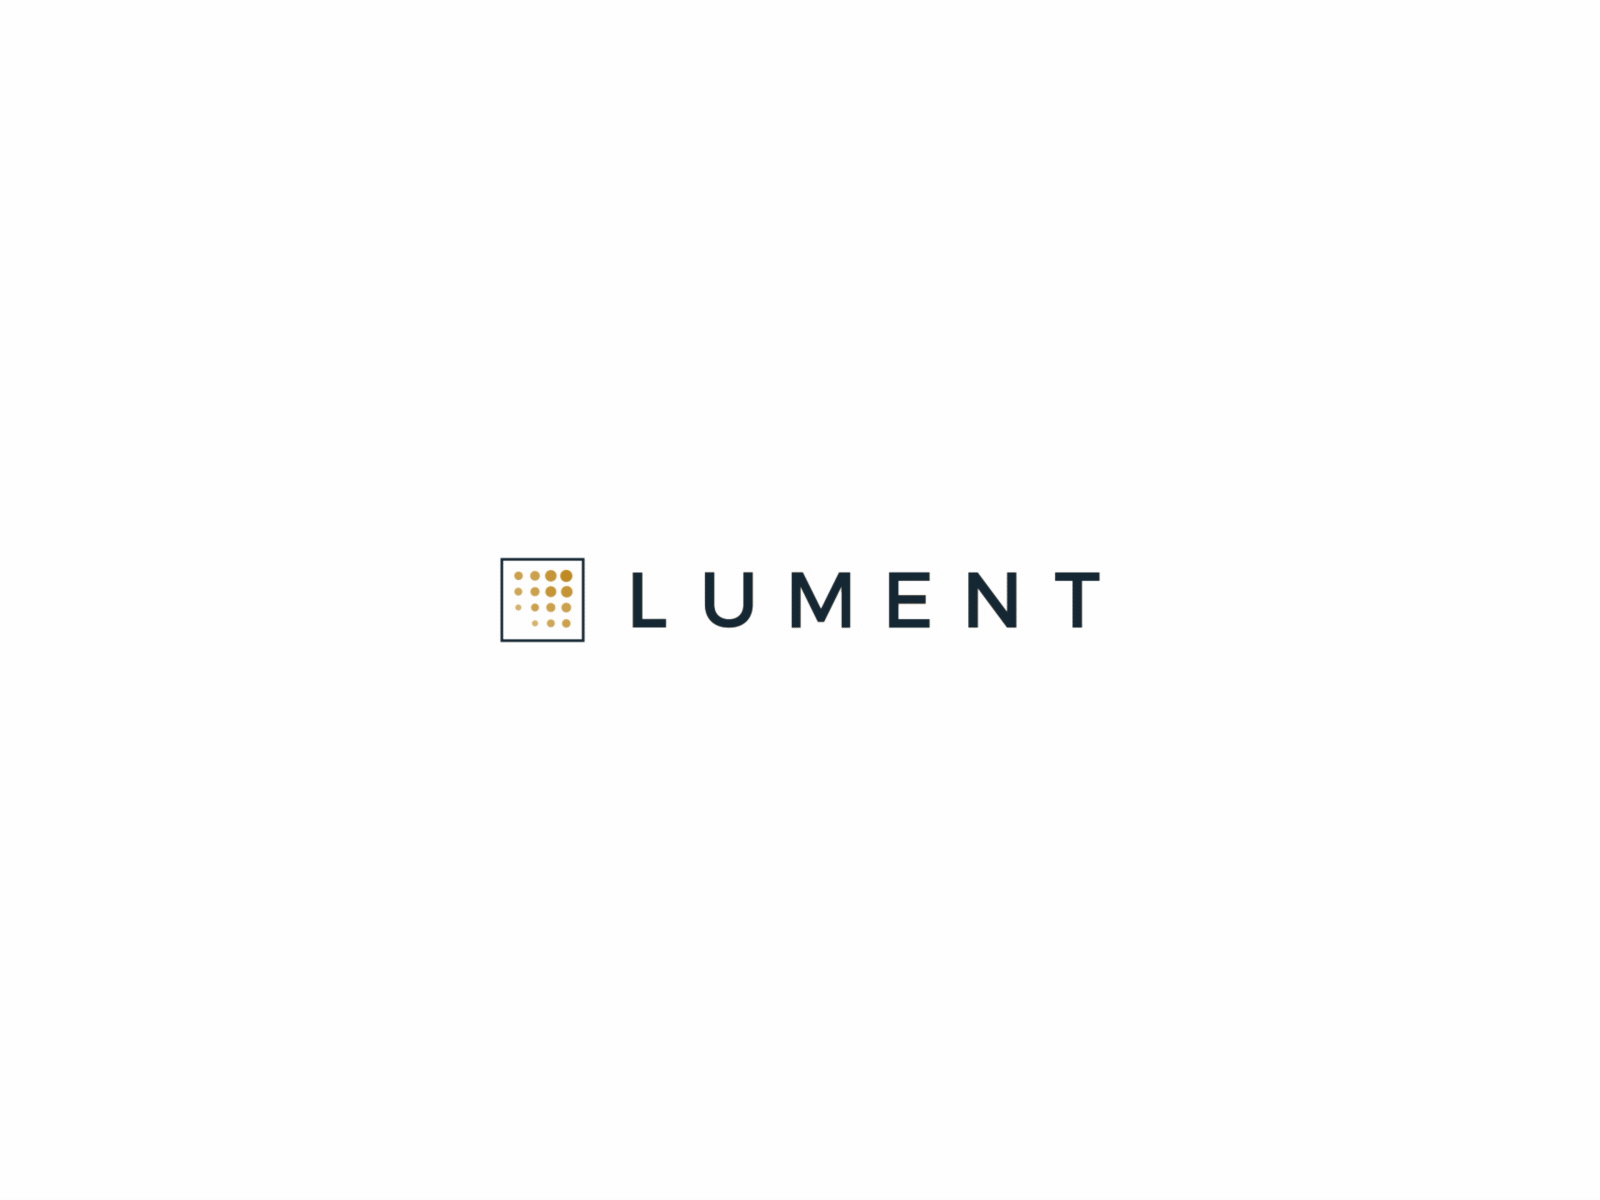 Lument Logo Animation 2d an after effects animated logo animated logos animation animation 2d animation after effects animation design animation logo logo animated logo animation logo animations motion motion graphics